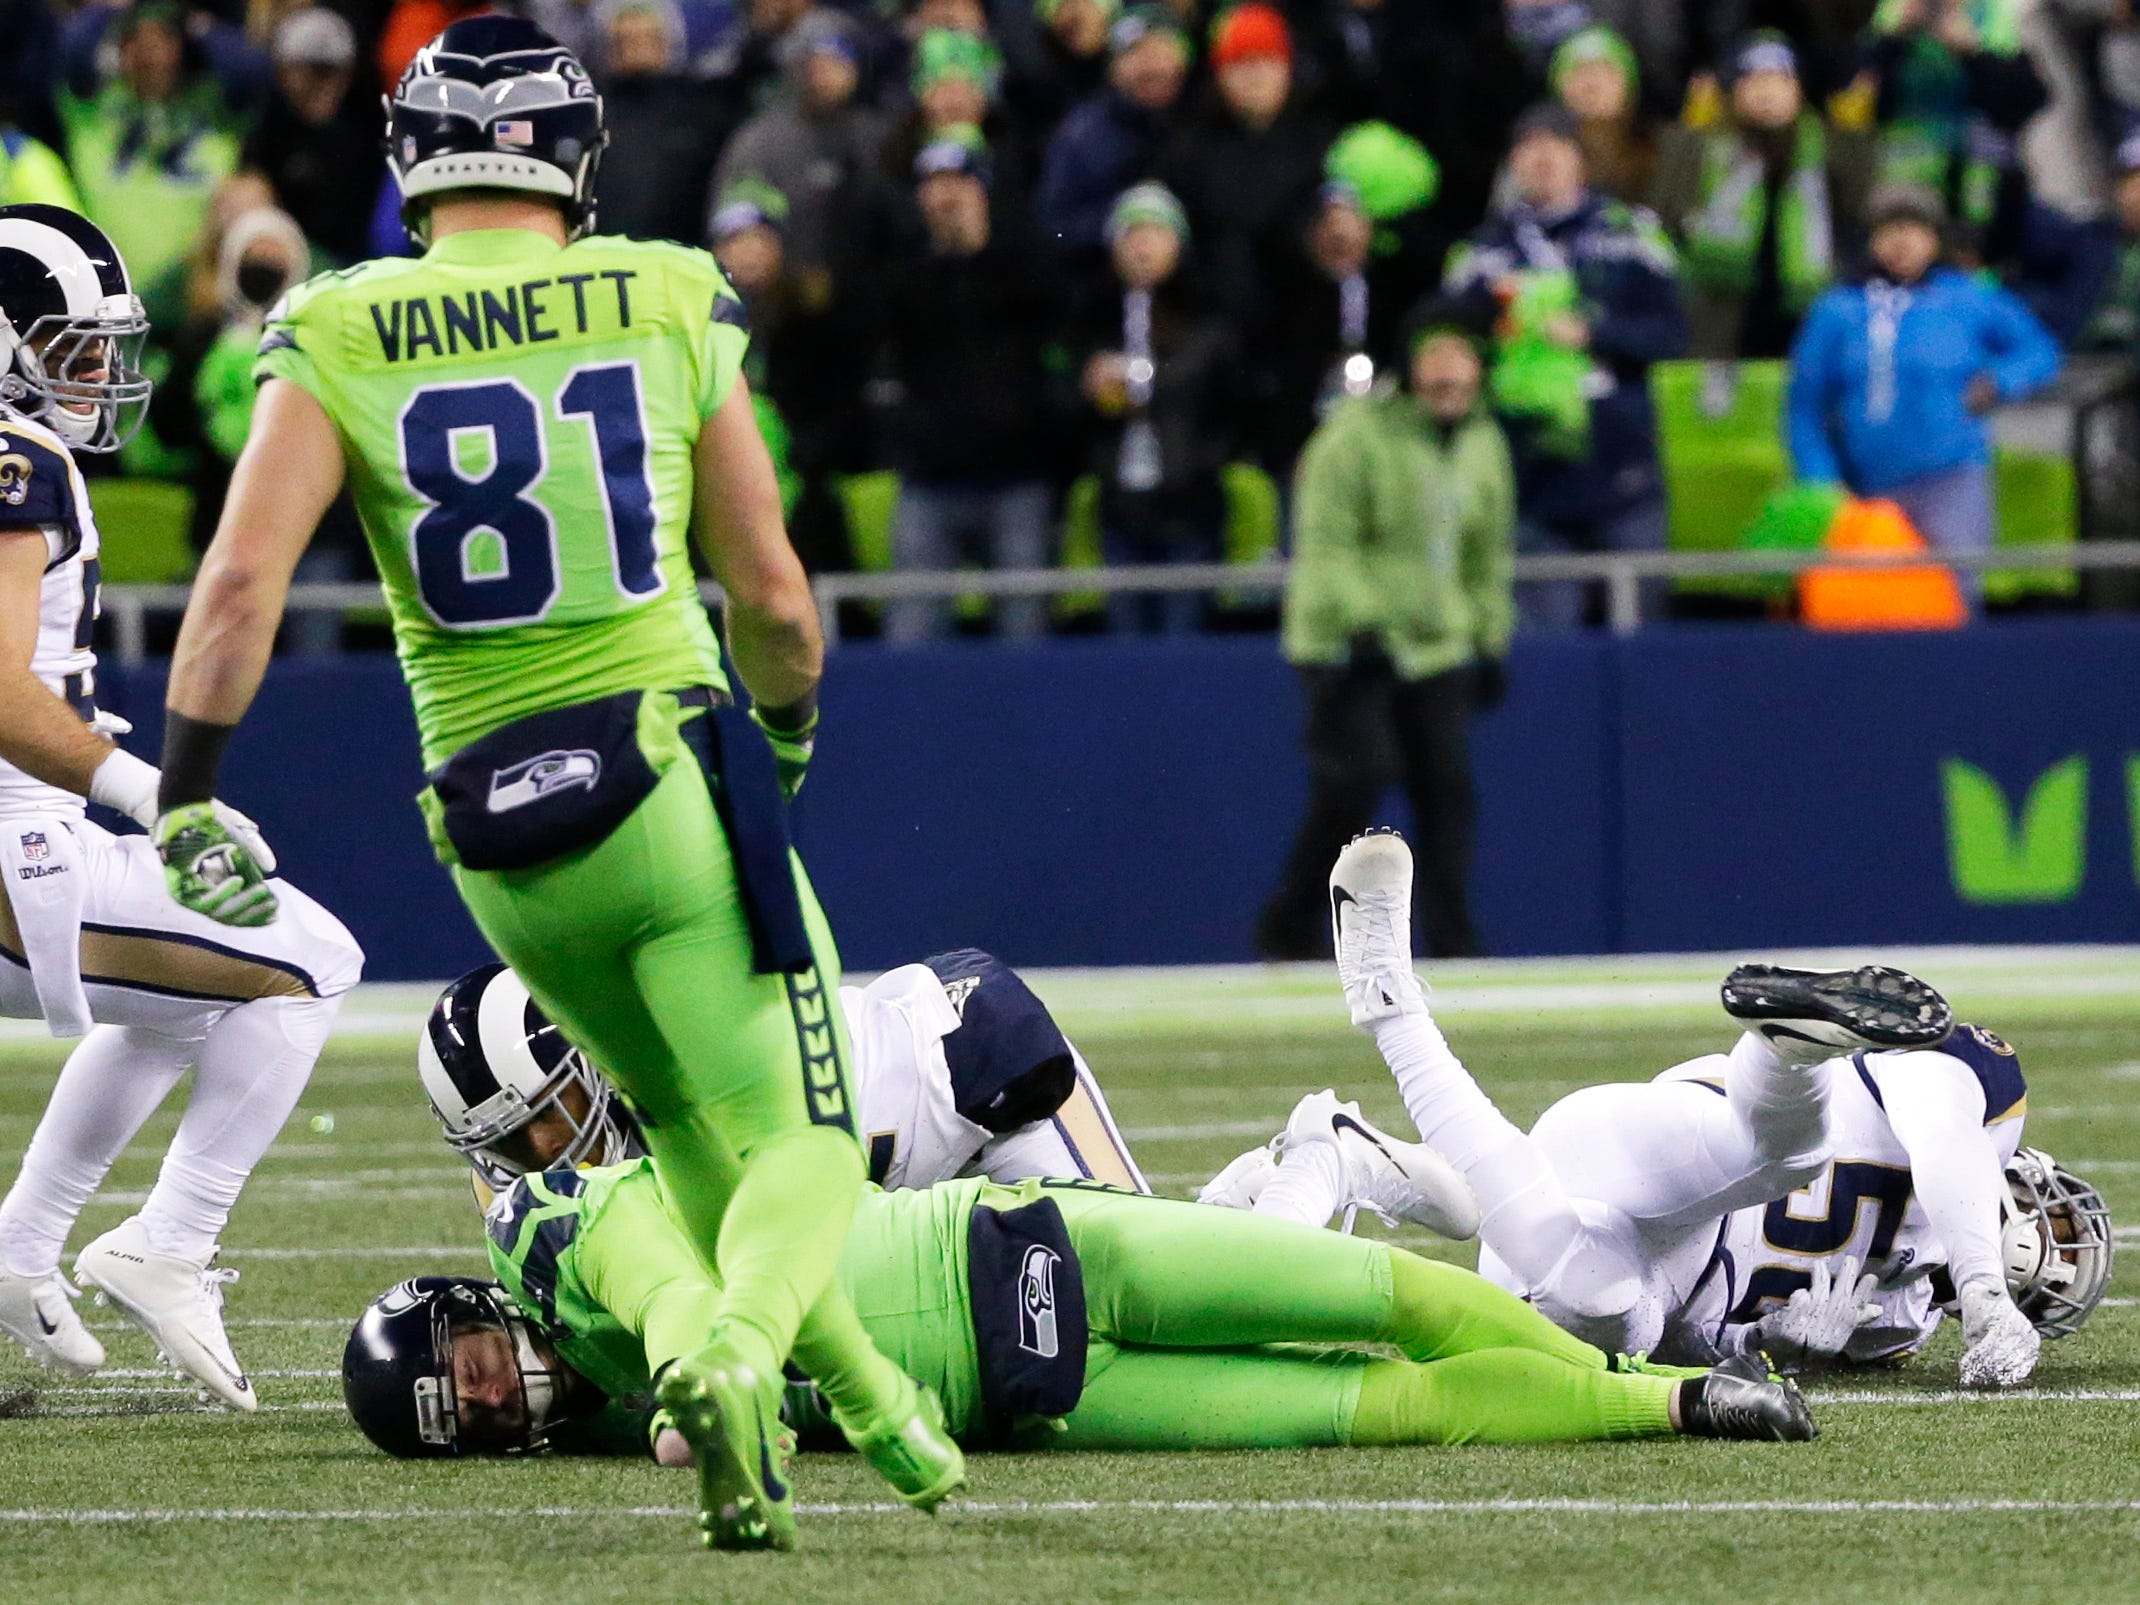 Seattle Seahawks punter Jon Ryan, lower left, lies on the turf after taking a hard hit while running the ball on a fake punt play against the Los Angeles Rams in the second half of an NFL football game, Thursday, Dec. 15, 2016, in Seattle. Ryan left 